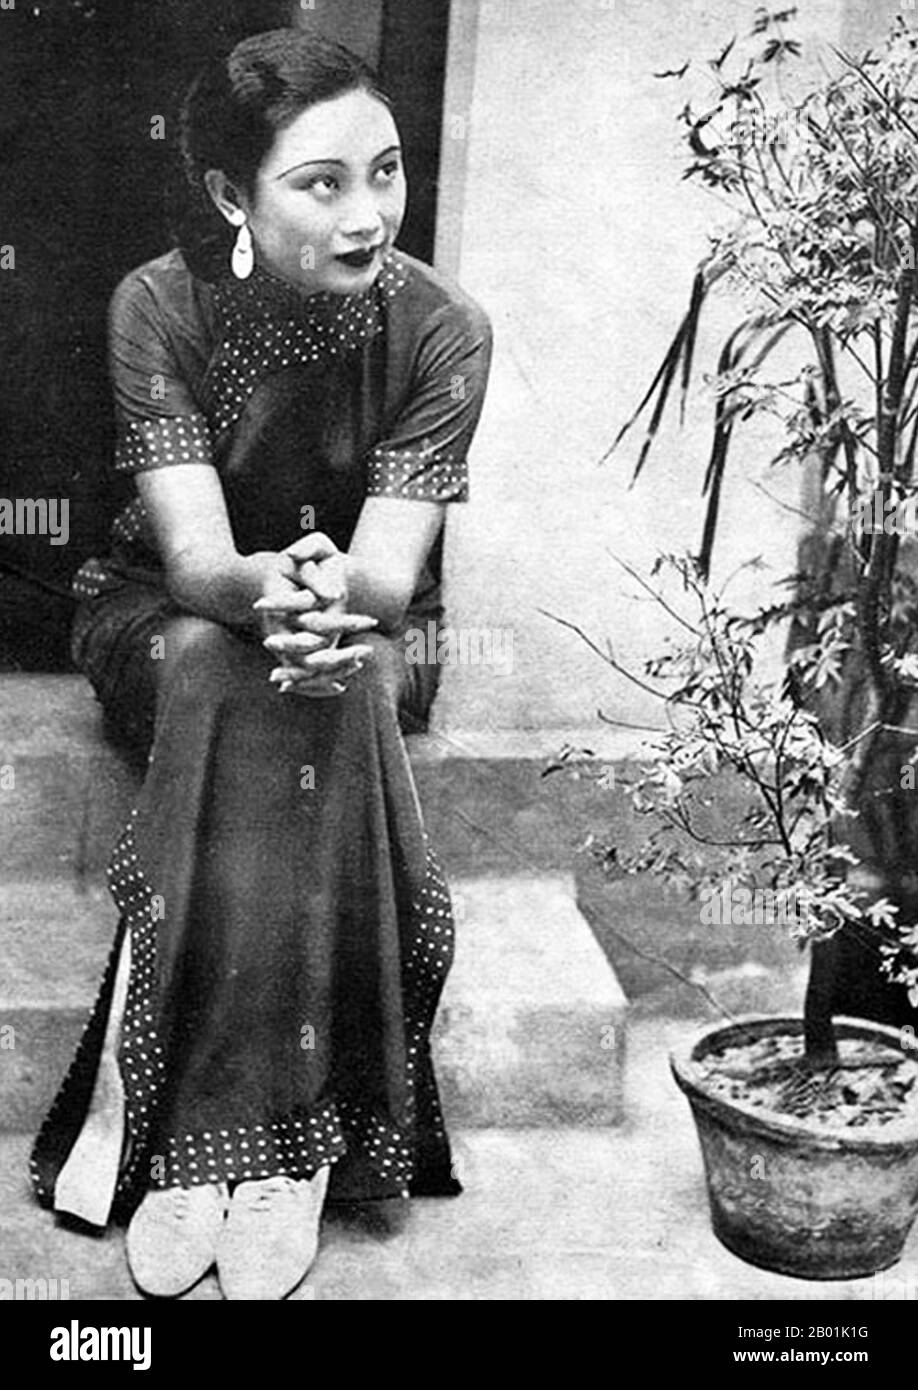 China: Shanghai actress Hu Die (23 March 1908 - 23 April 1989), also known as 'Butterfly Hu', c. 1930s.  Hu Die, born Hu Ruihua, had a career as a film actress from the late 1920s to the 1960s. She had her most brilliant period in the 1930s and the 1940s. Early in the 1930s, she played the leading role in China's first sound film, The Singsong Girl, in which she portrays a kindhearted but somewhat ignorant woman who endures her husband's mistreatment and oppression without the slightest resistance. Stock Photo